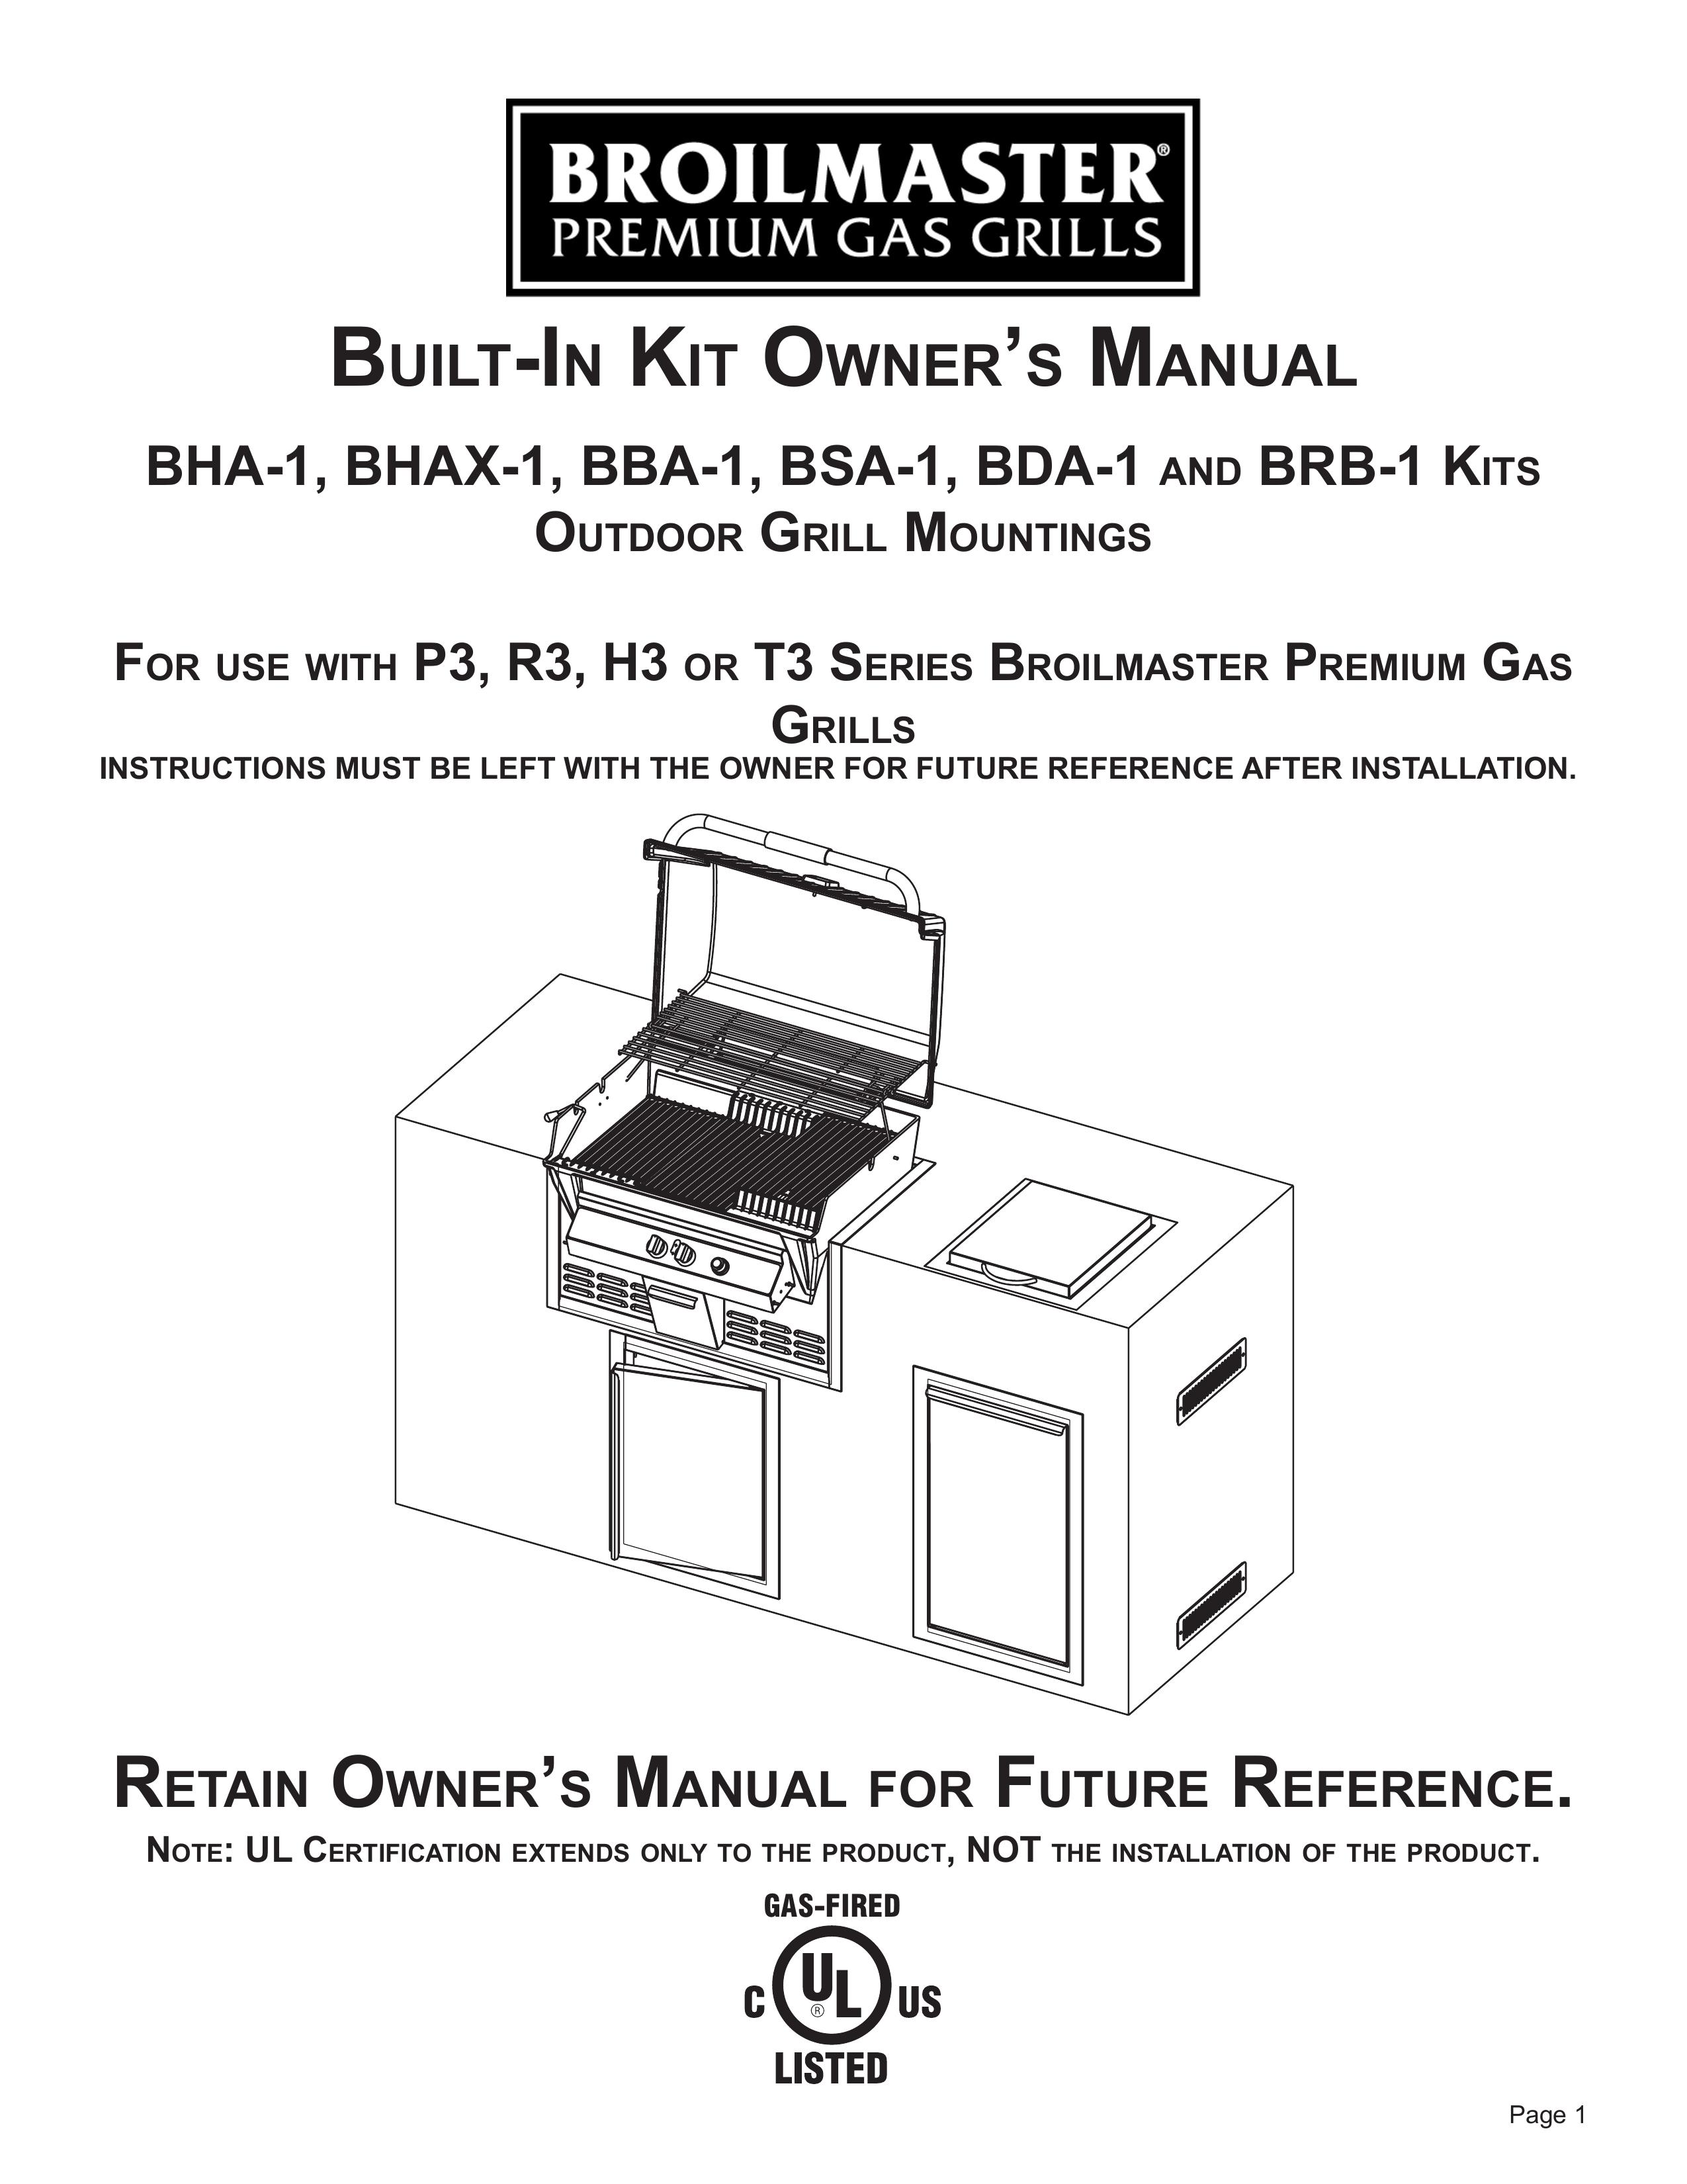 Broilmaster BHAX-1 Gas Grill User Manual